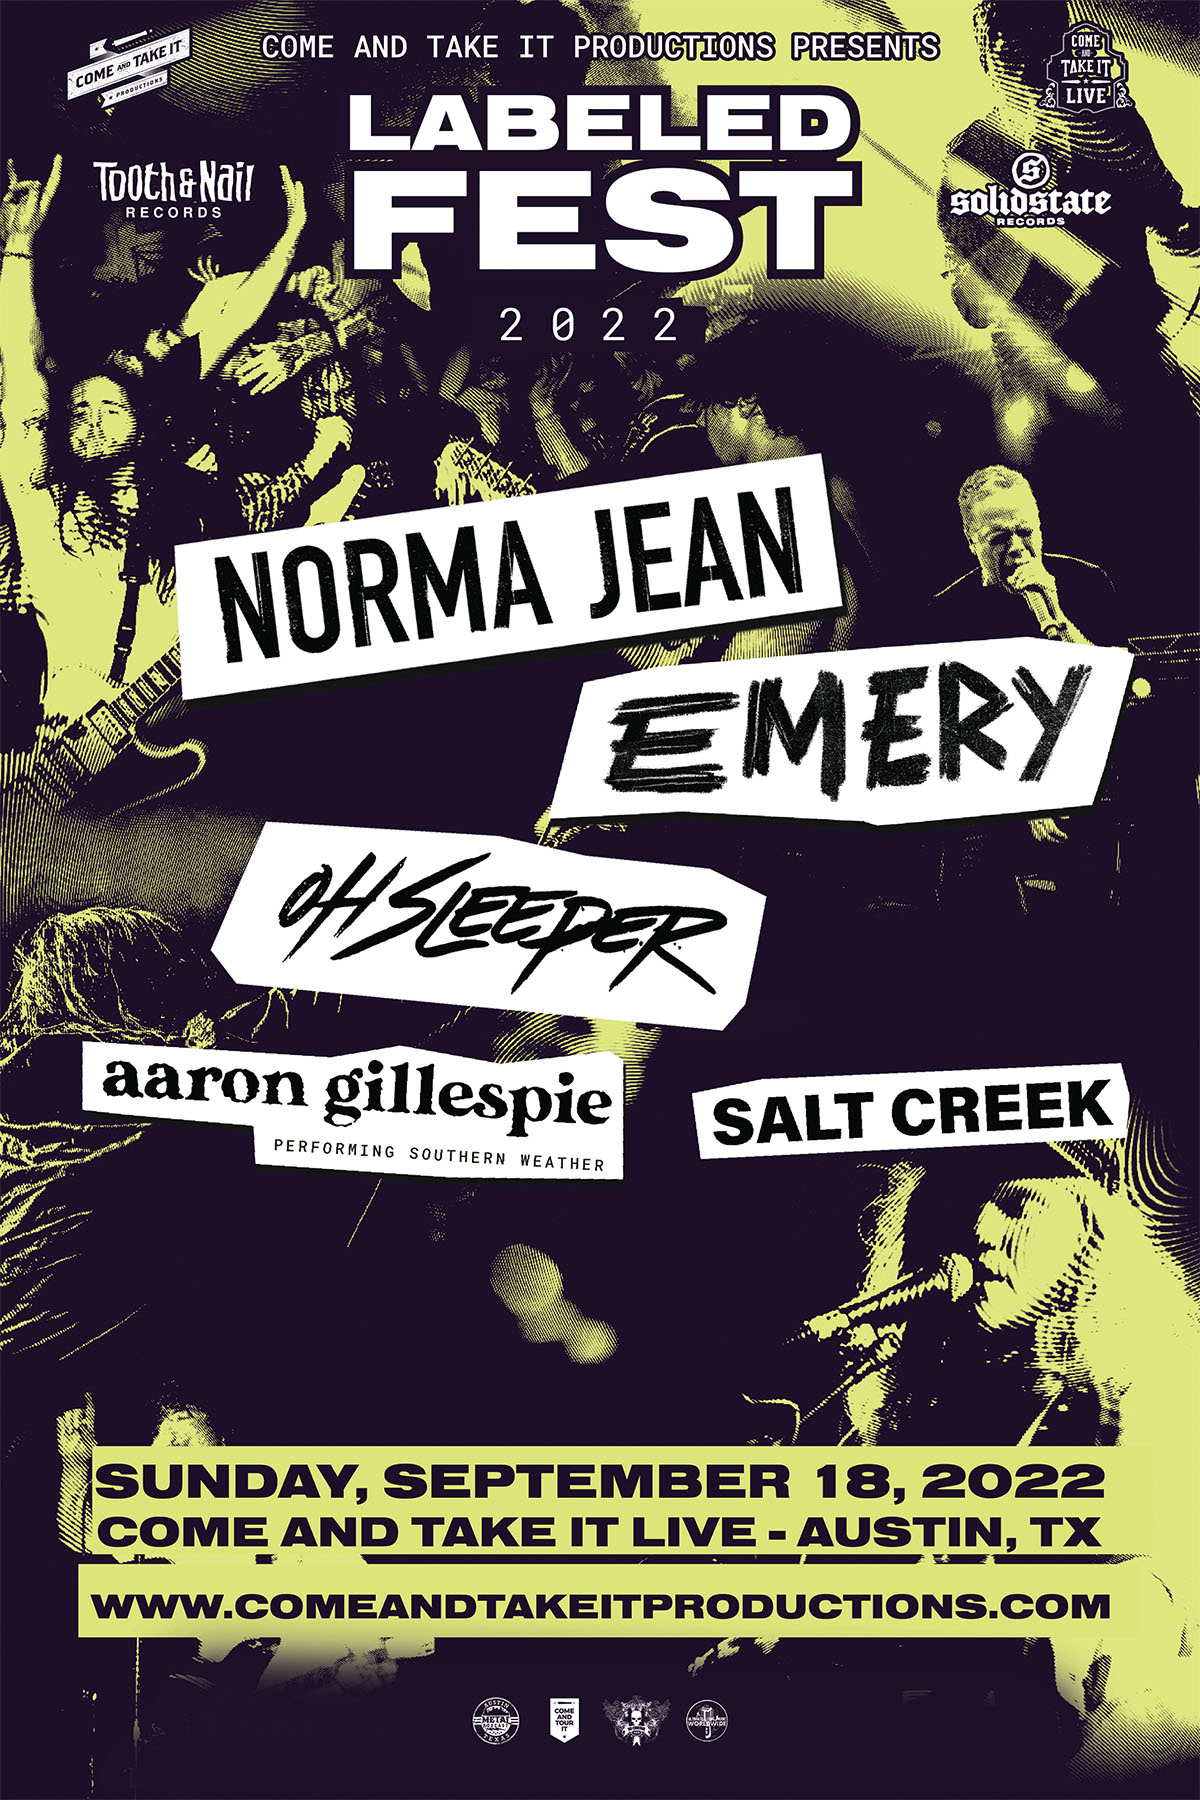 Emery, Norma Jean, Oh Sleeper, Aaron Gillespie and MORE